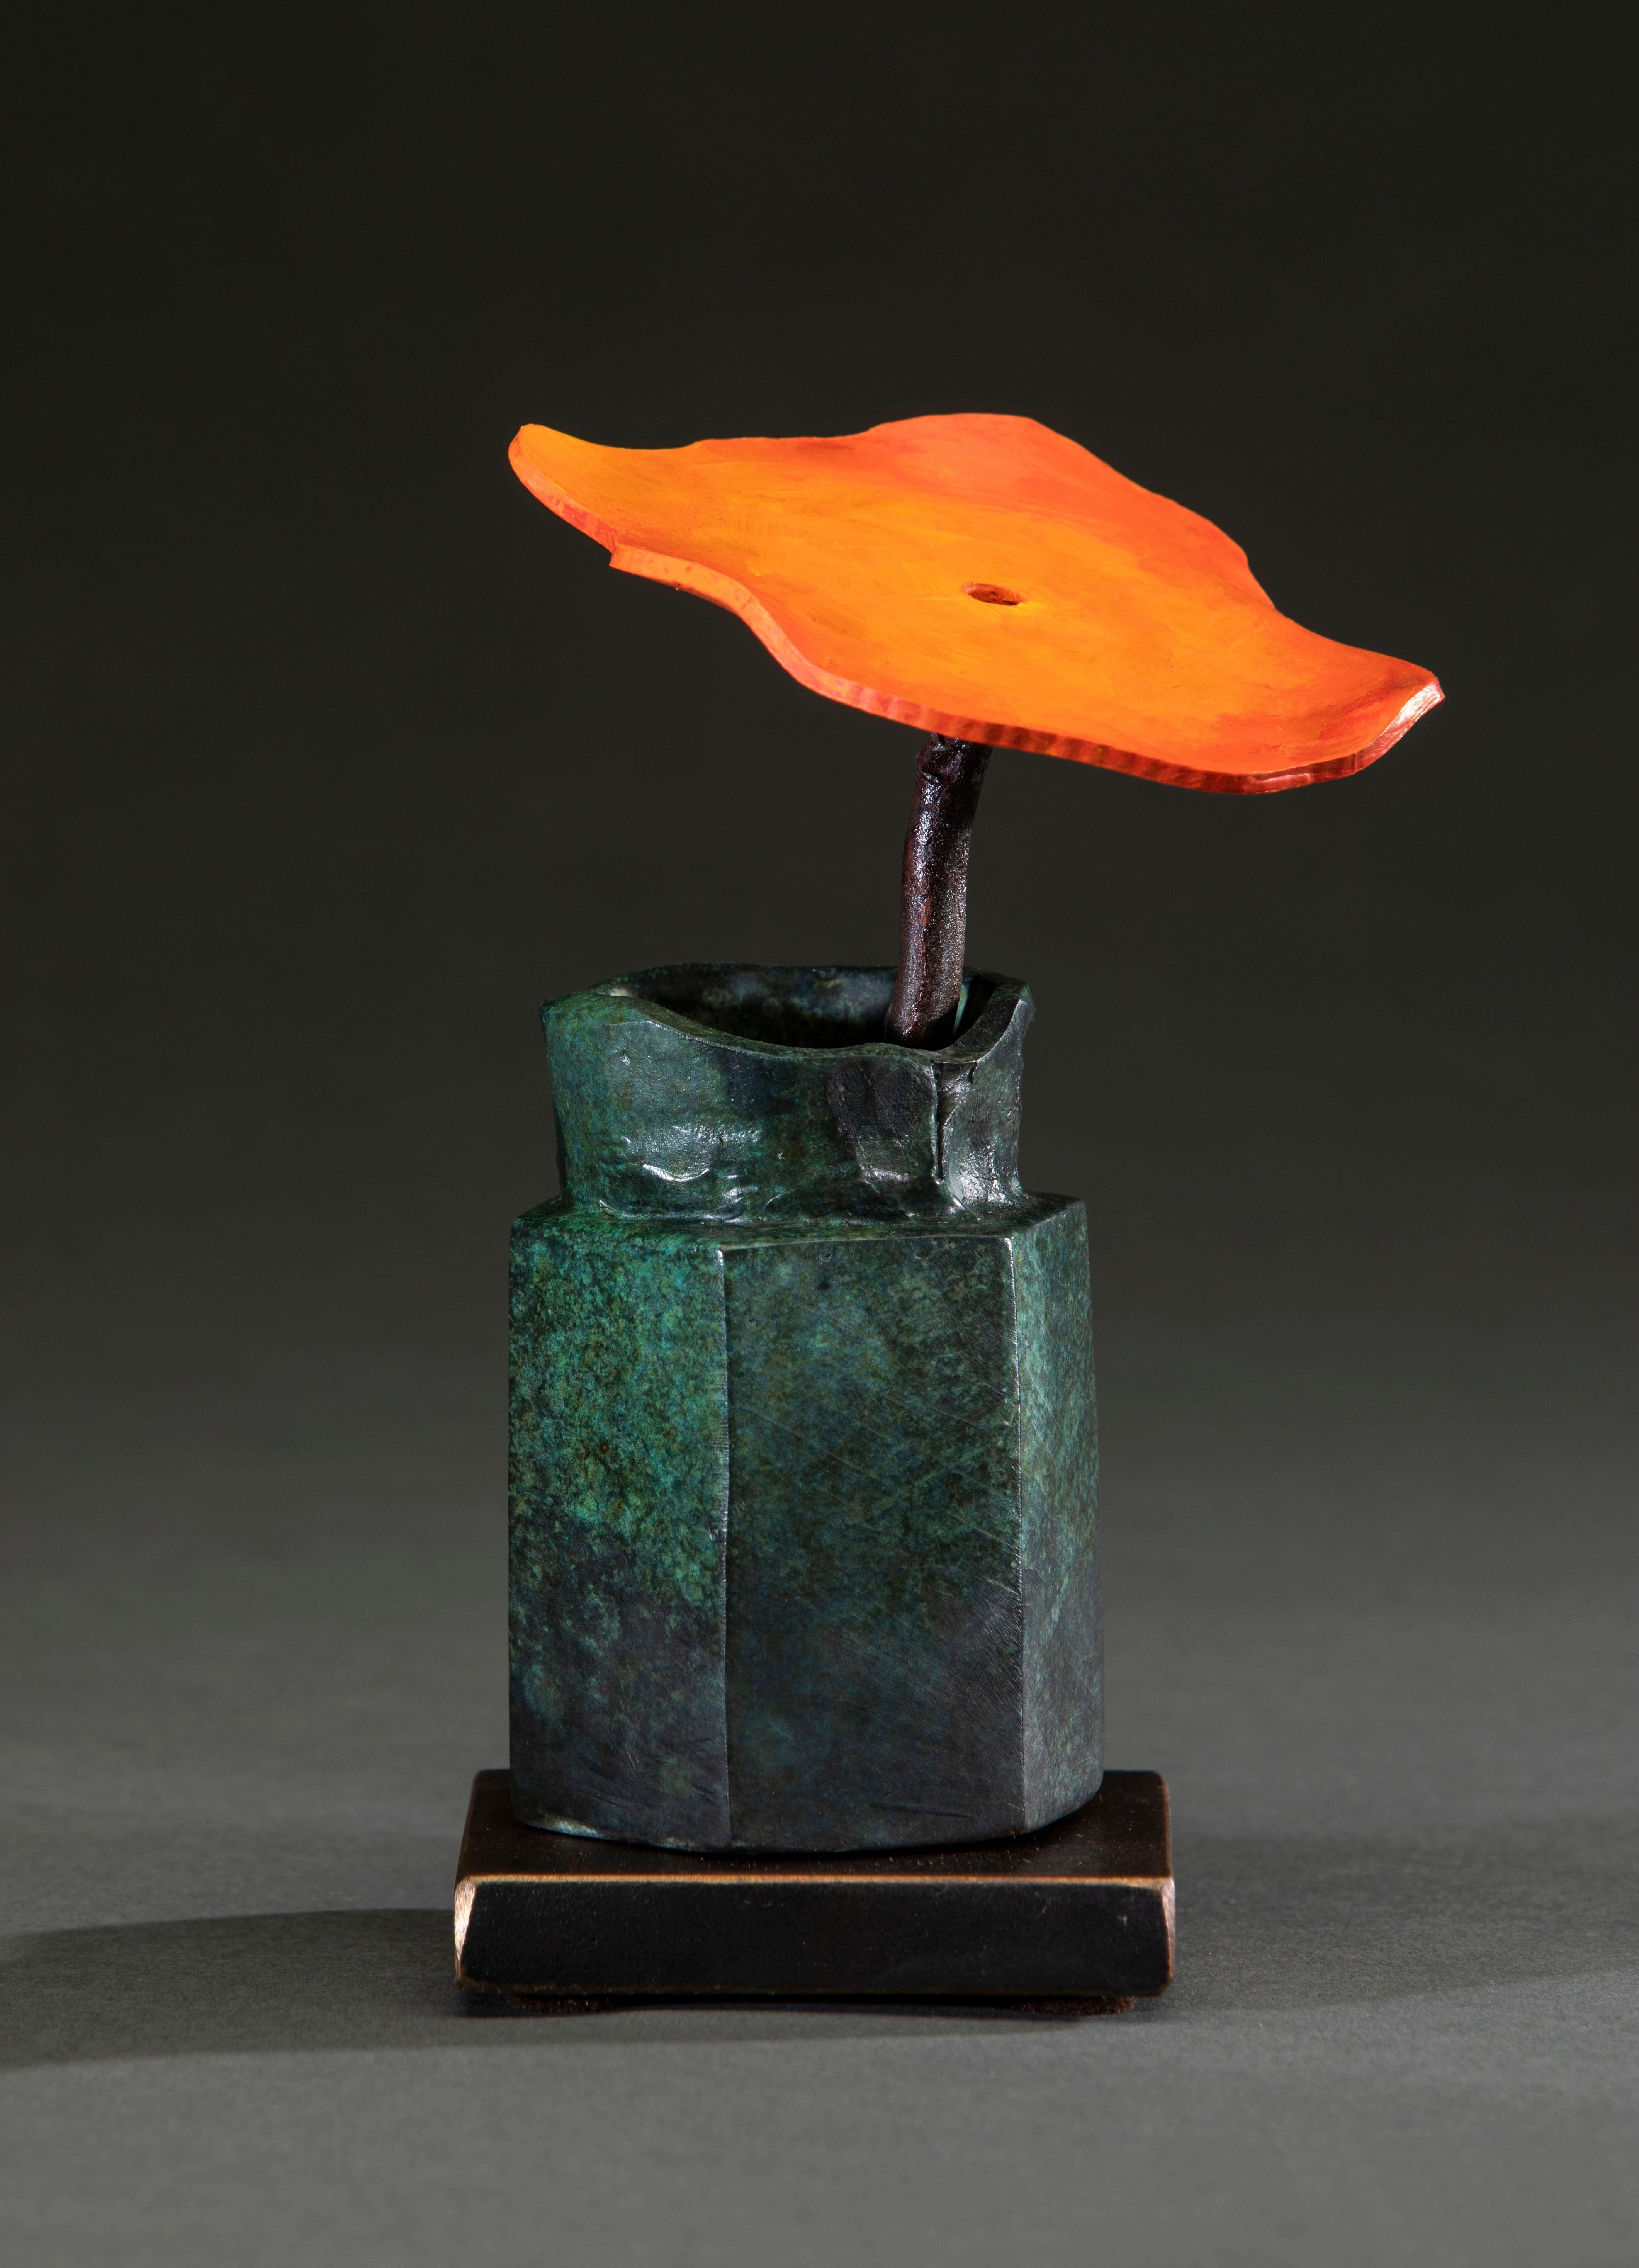 'Japanese Bottle Orange Flower' by David Kimball Anderson, 2022. Bronze, steel, and paint, 6 x 6 x 6 in. This sculpture features a cylindrical vase cast in bronze and finished with a green patina. It features one large steel flower, painted bright